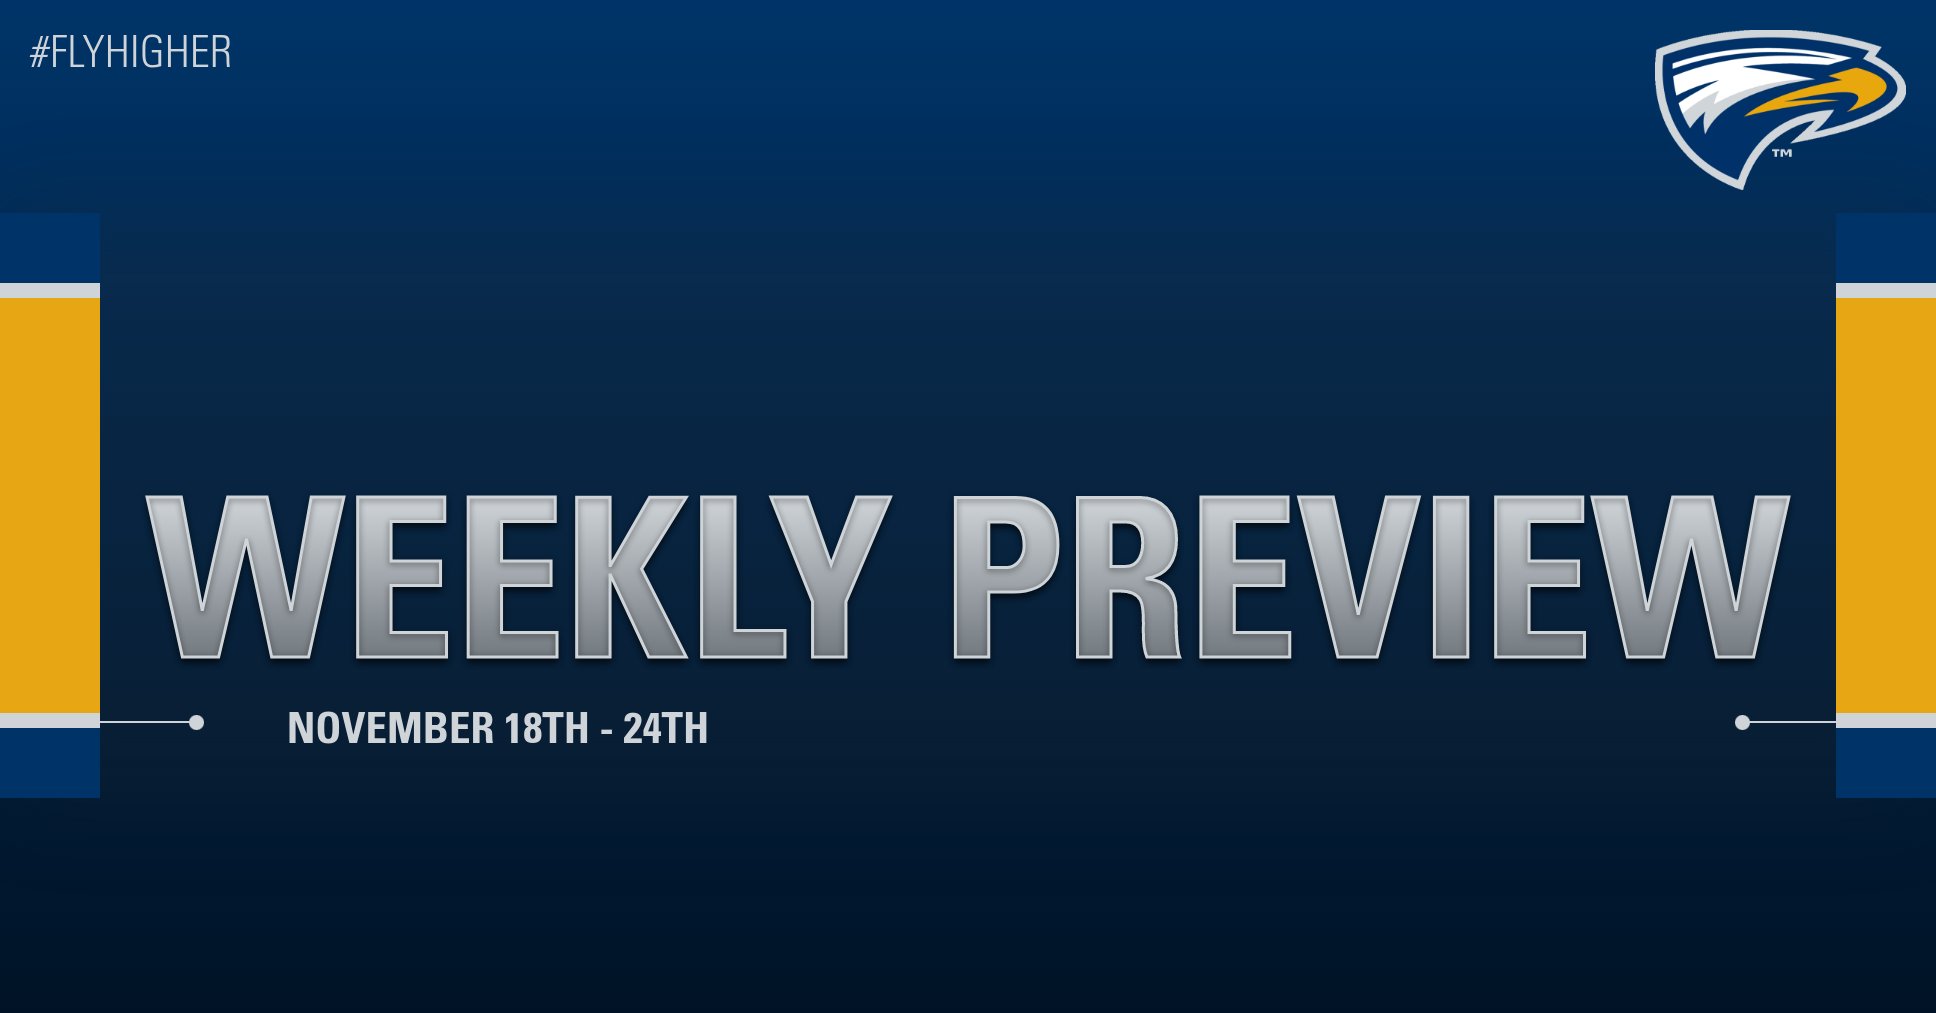 Emory Athletics Weekly Preview - November 18th - 24th